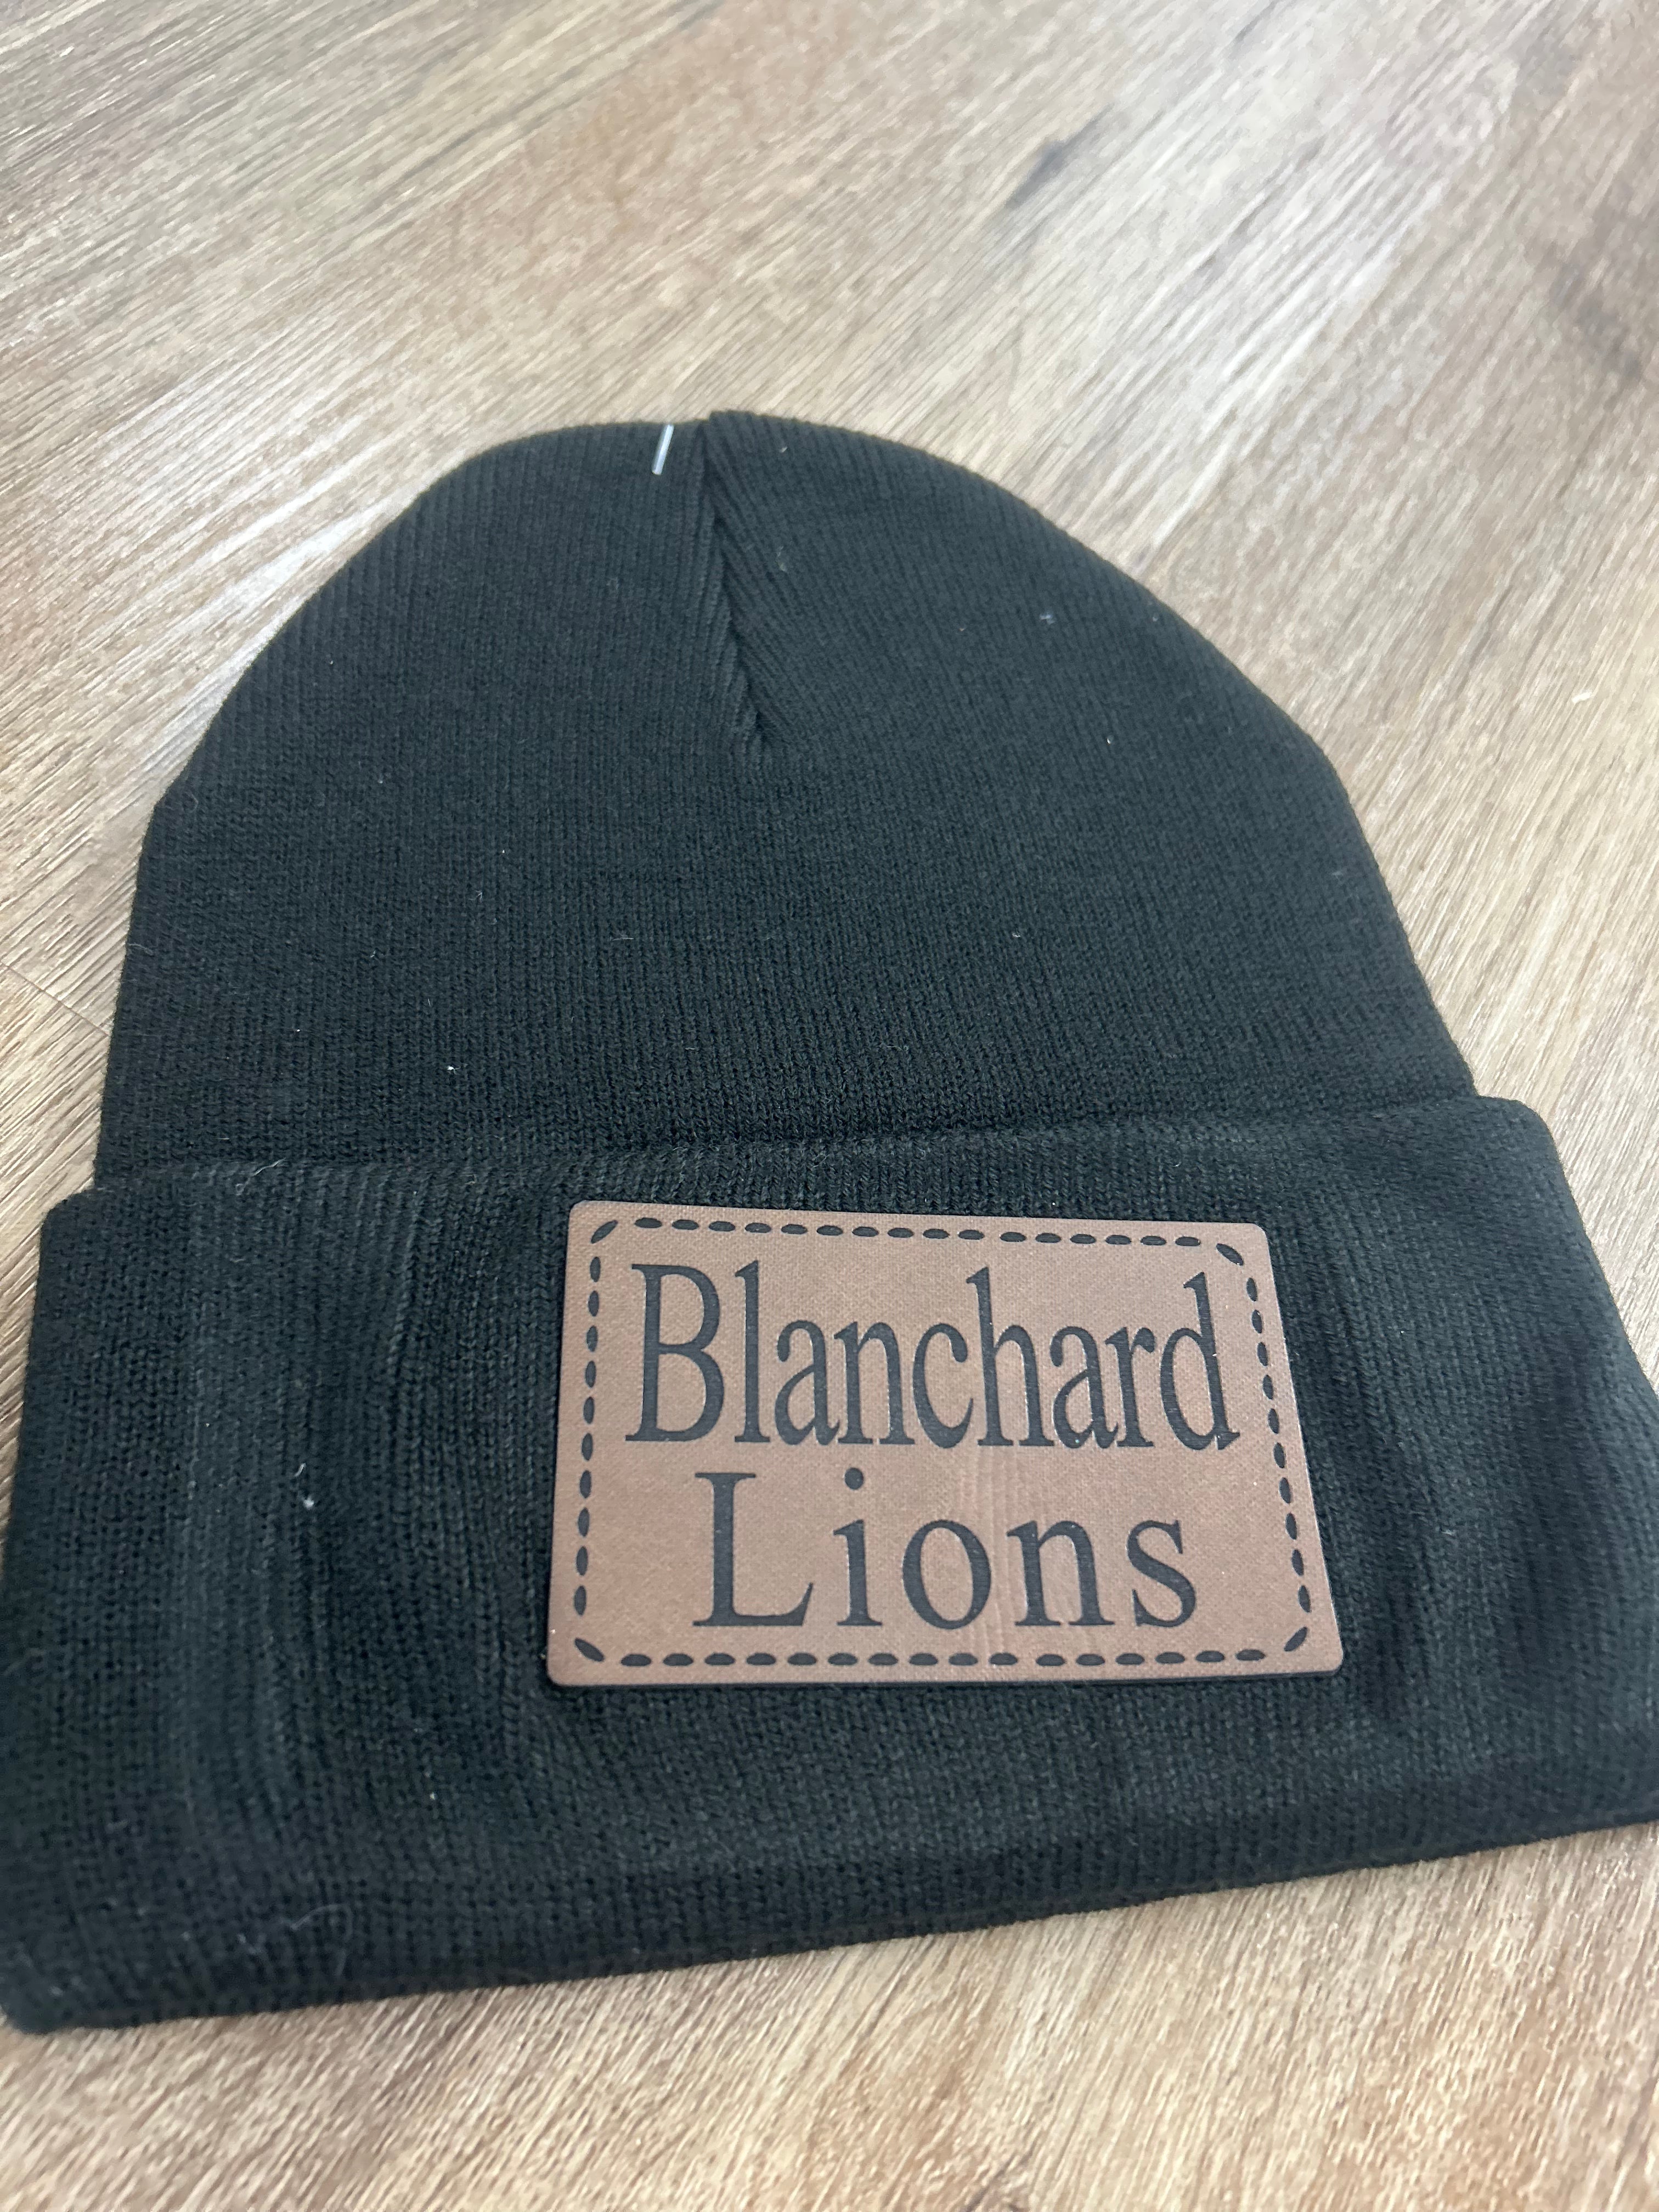 LIONS leather patch beanie